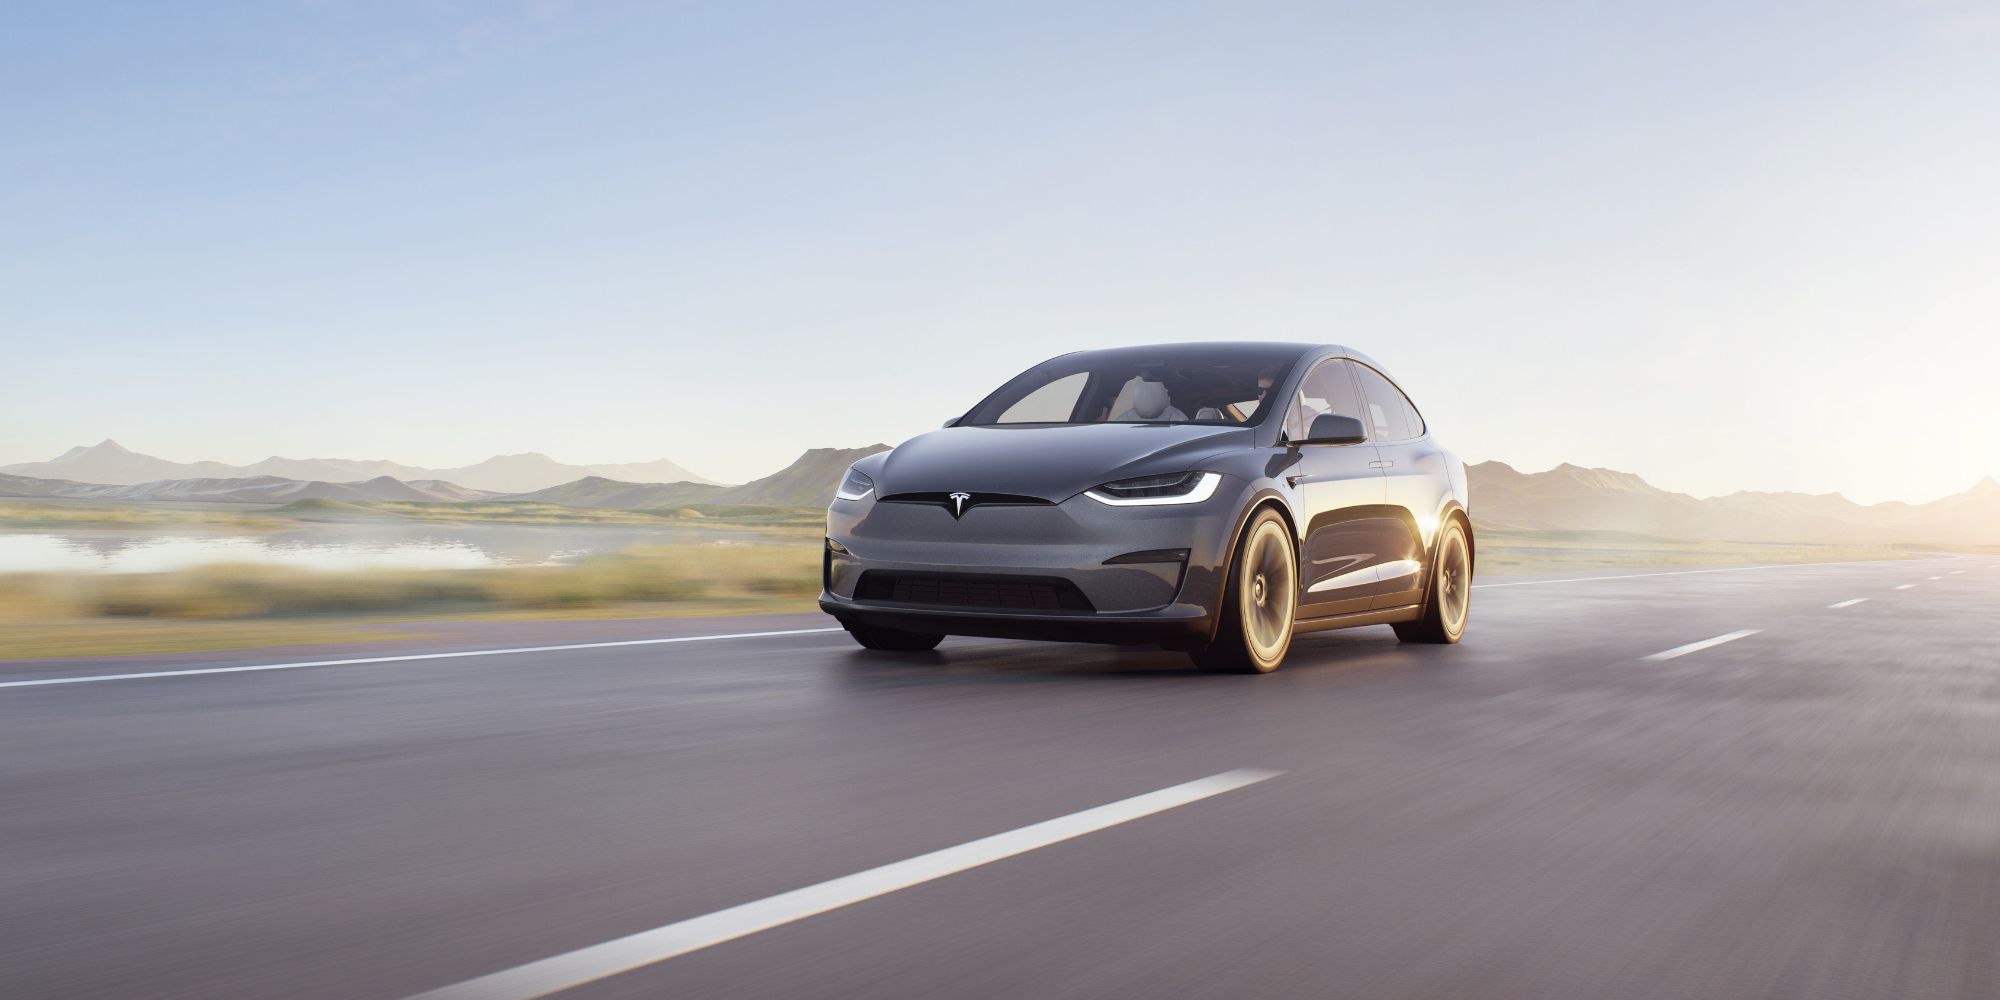 Gray Tesla Model X driving on a road